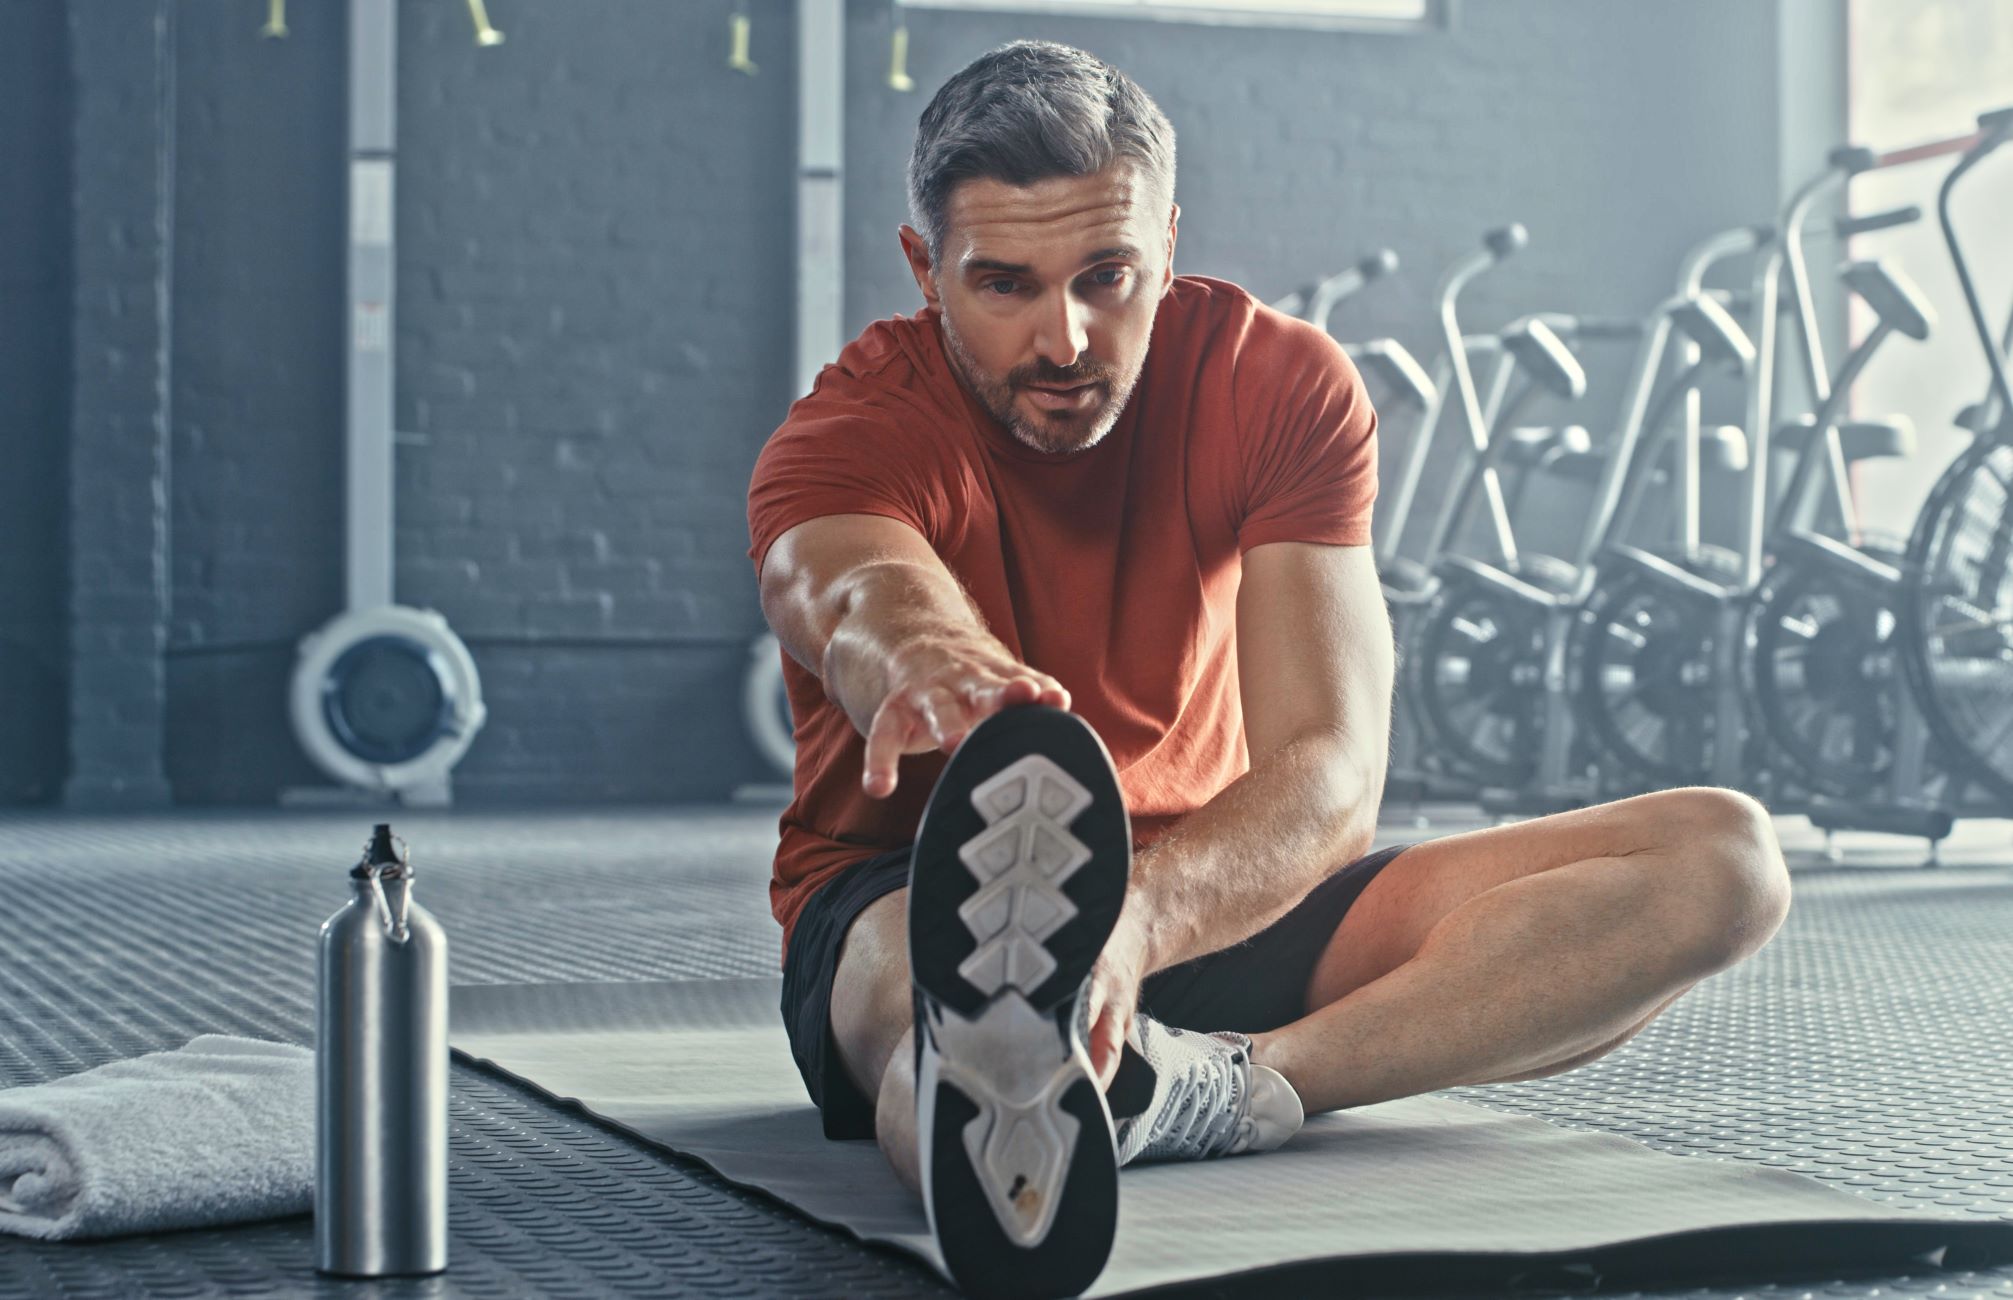 6 Strategies For Building Strength After An Injury Through Running